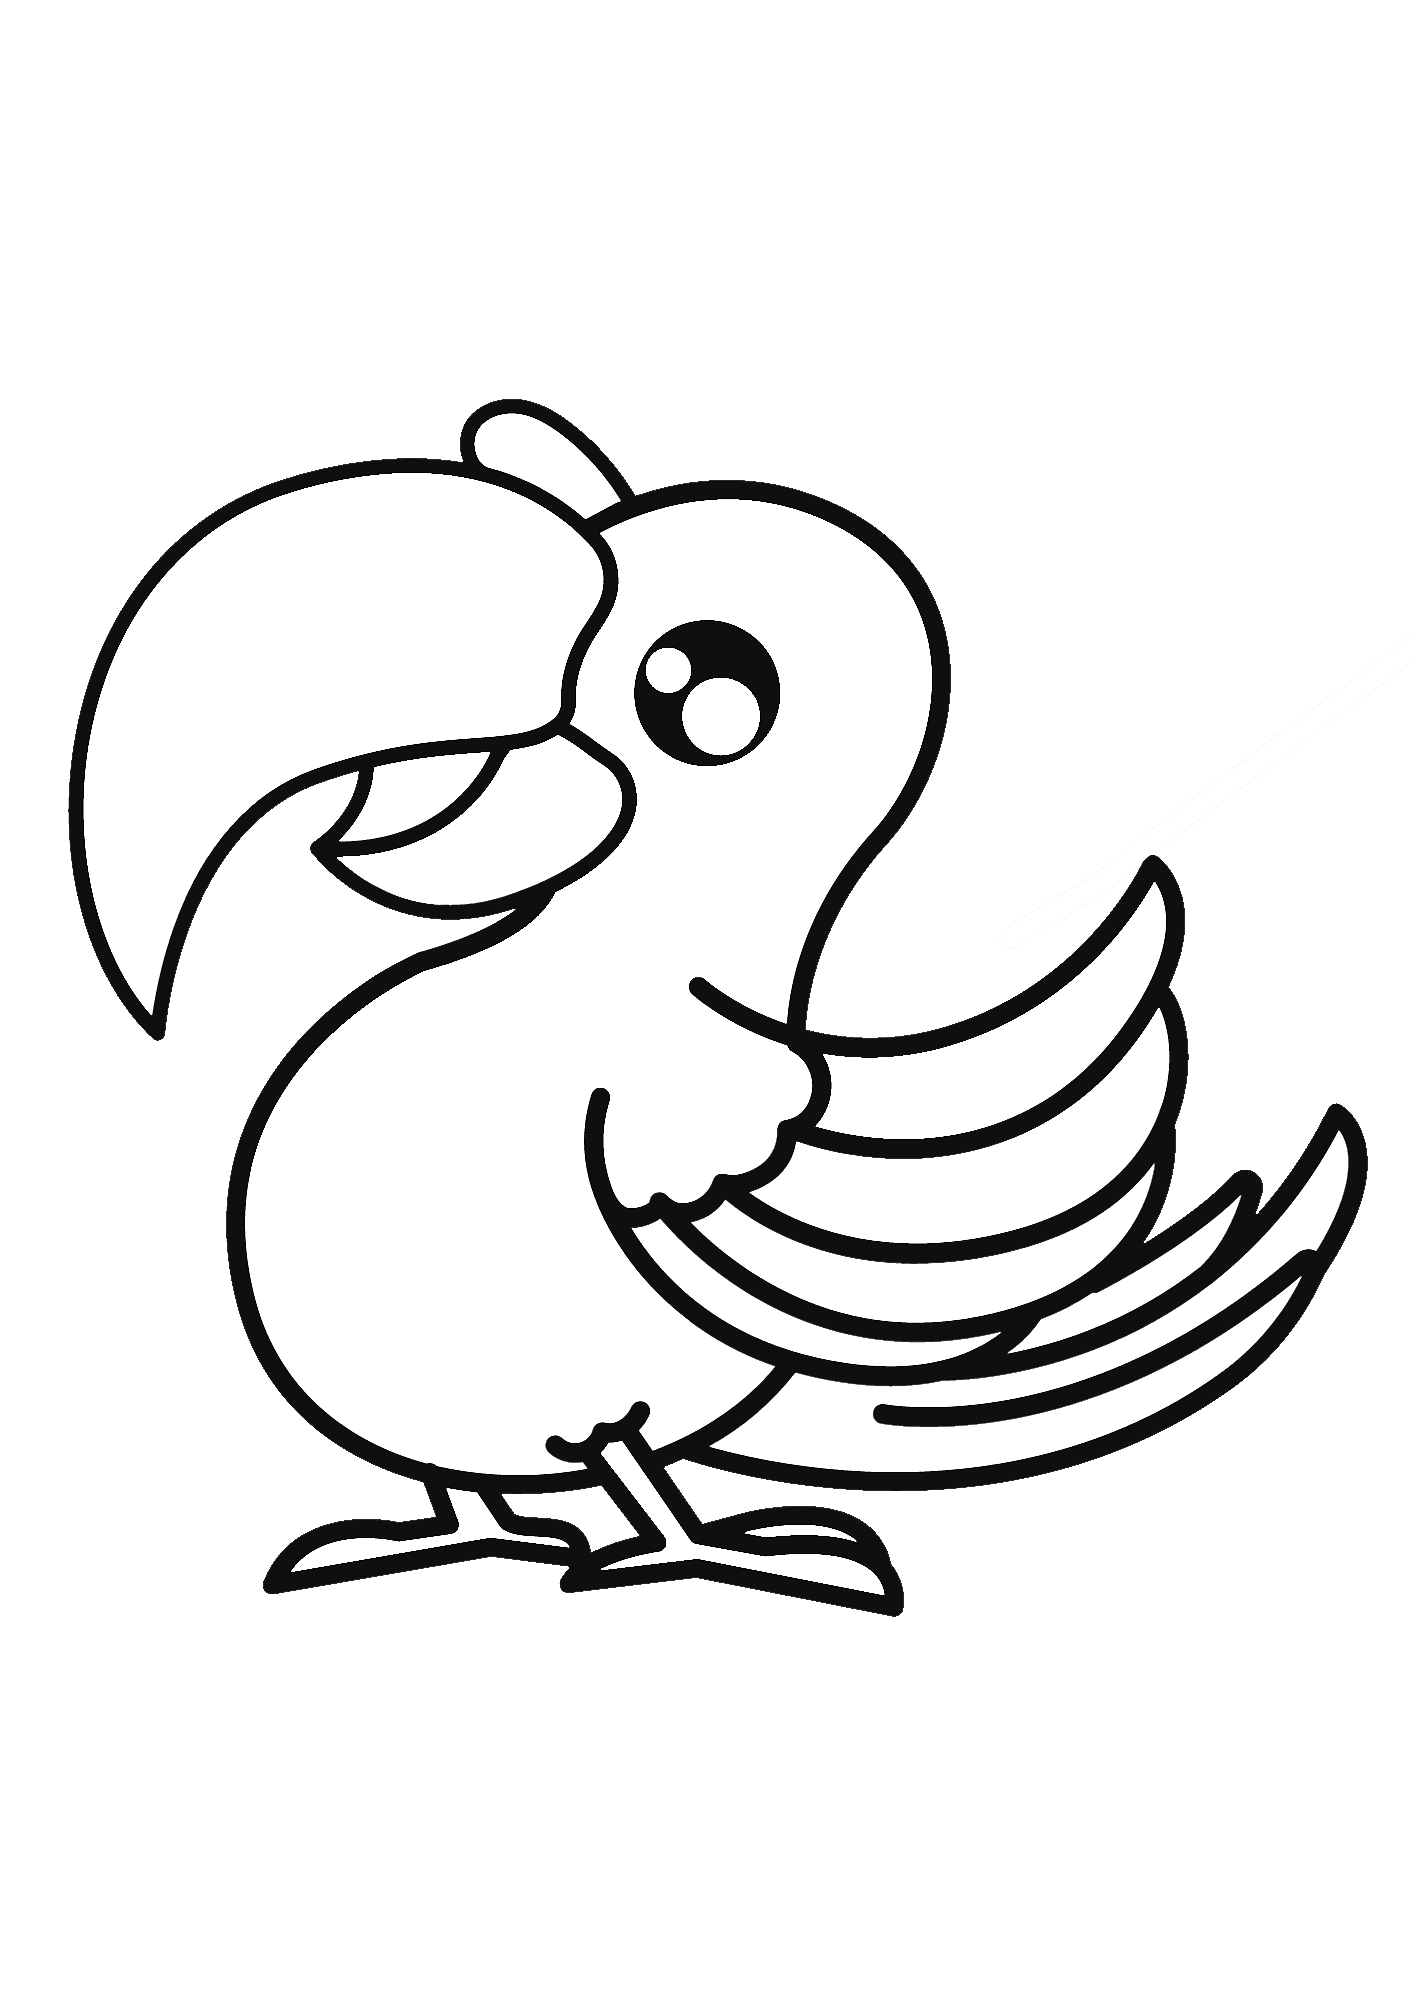 Blue Cockatoo Coloring Page